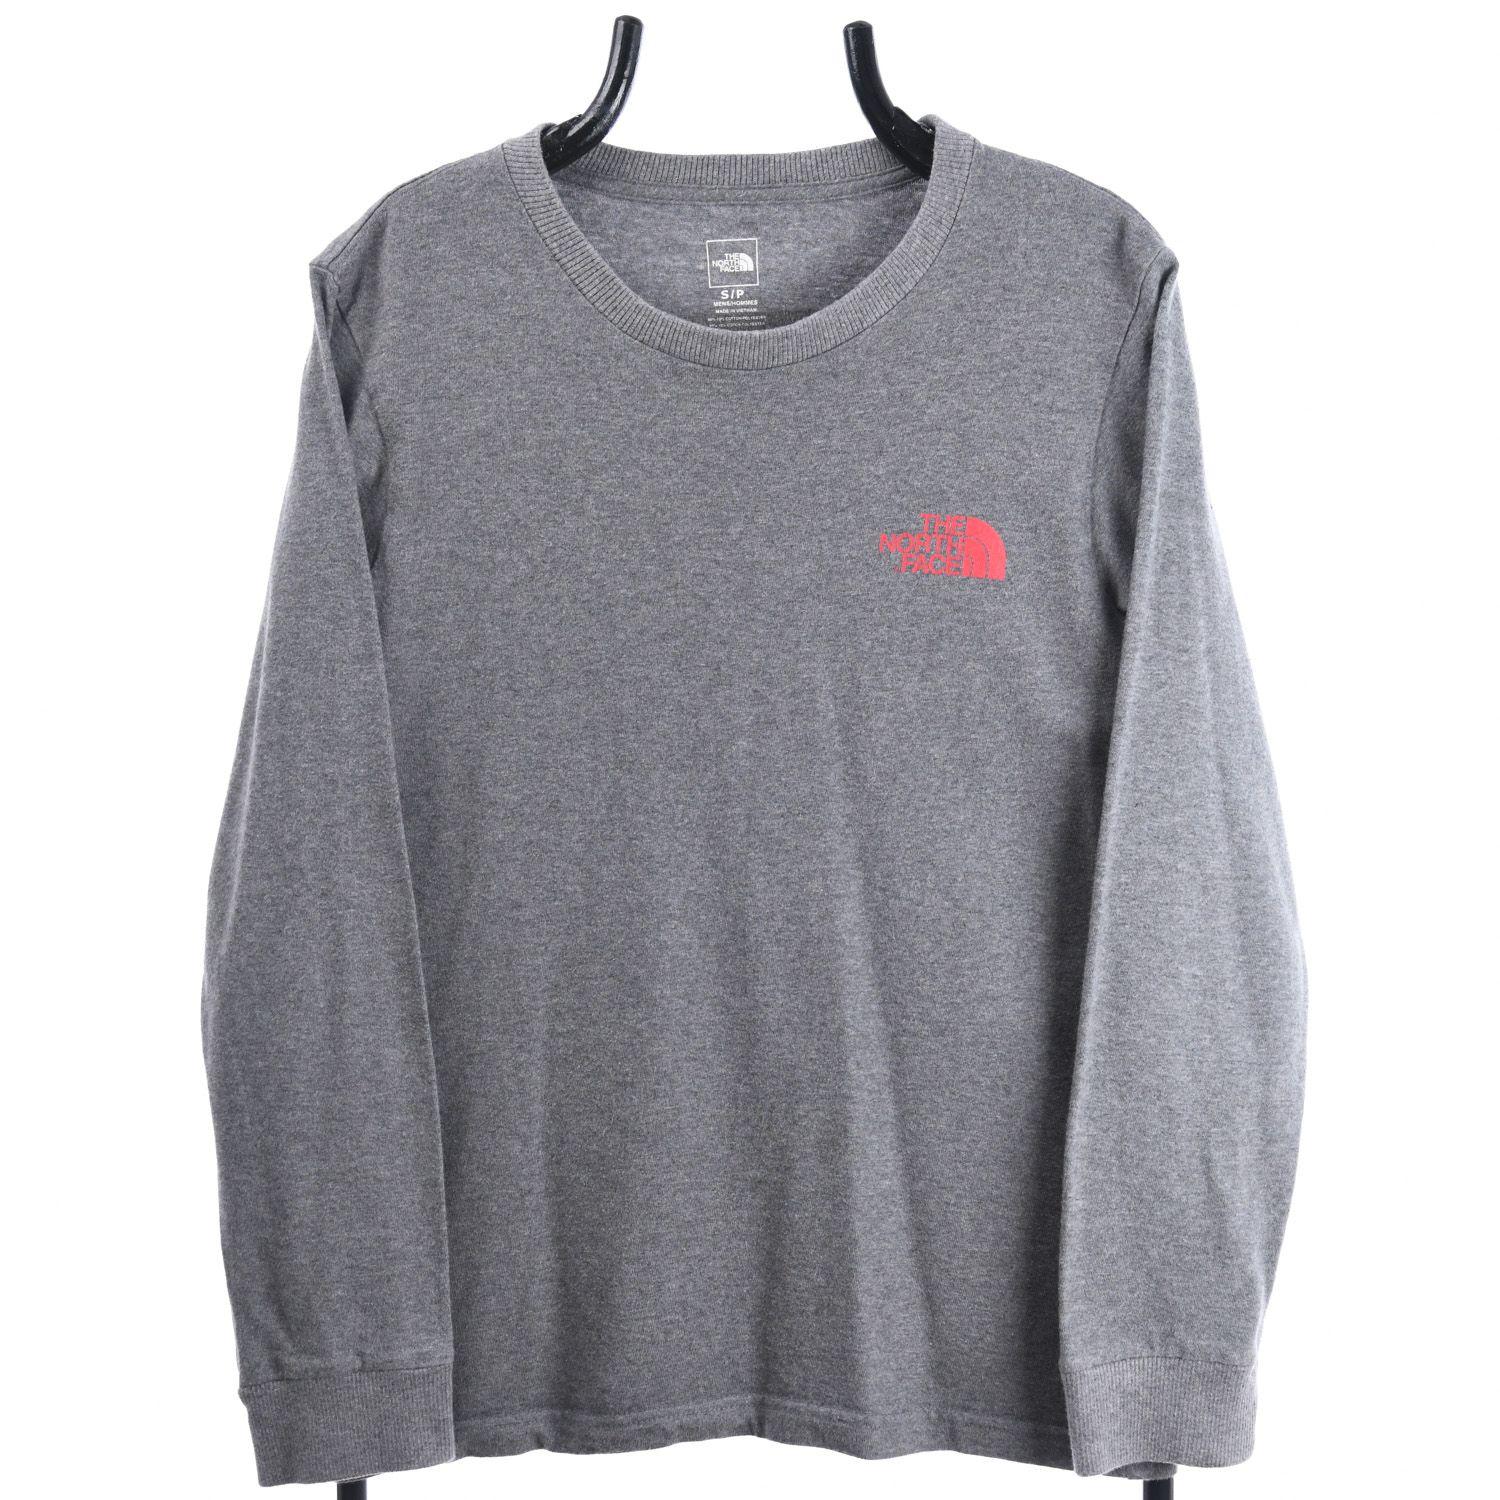 The North Face Long Sleeve T-Shirt